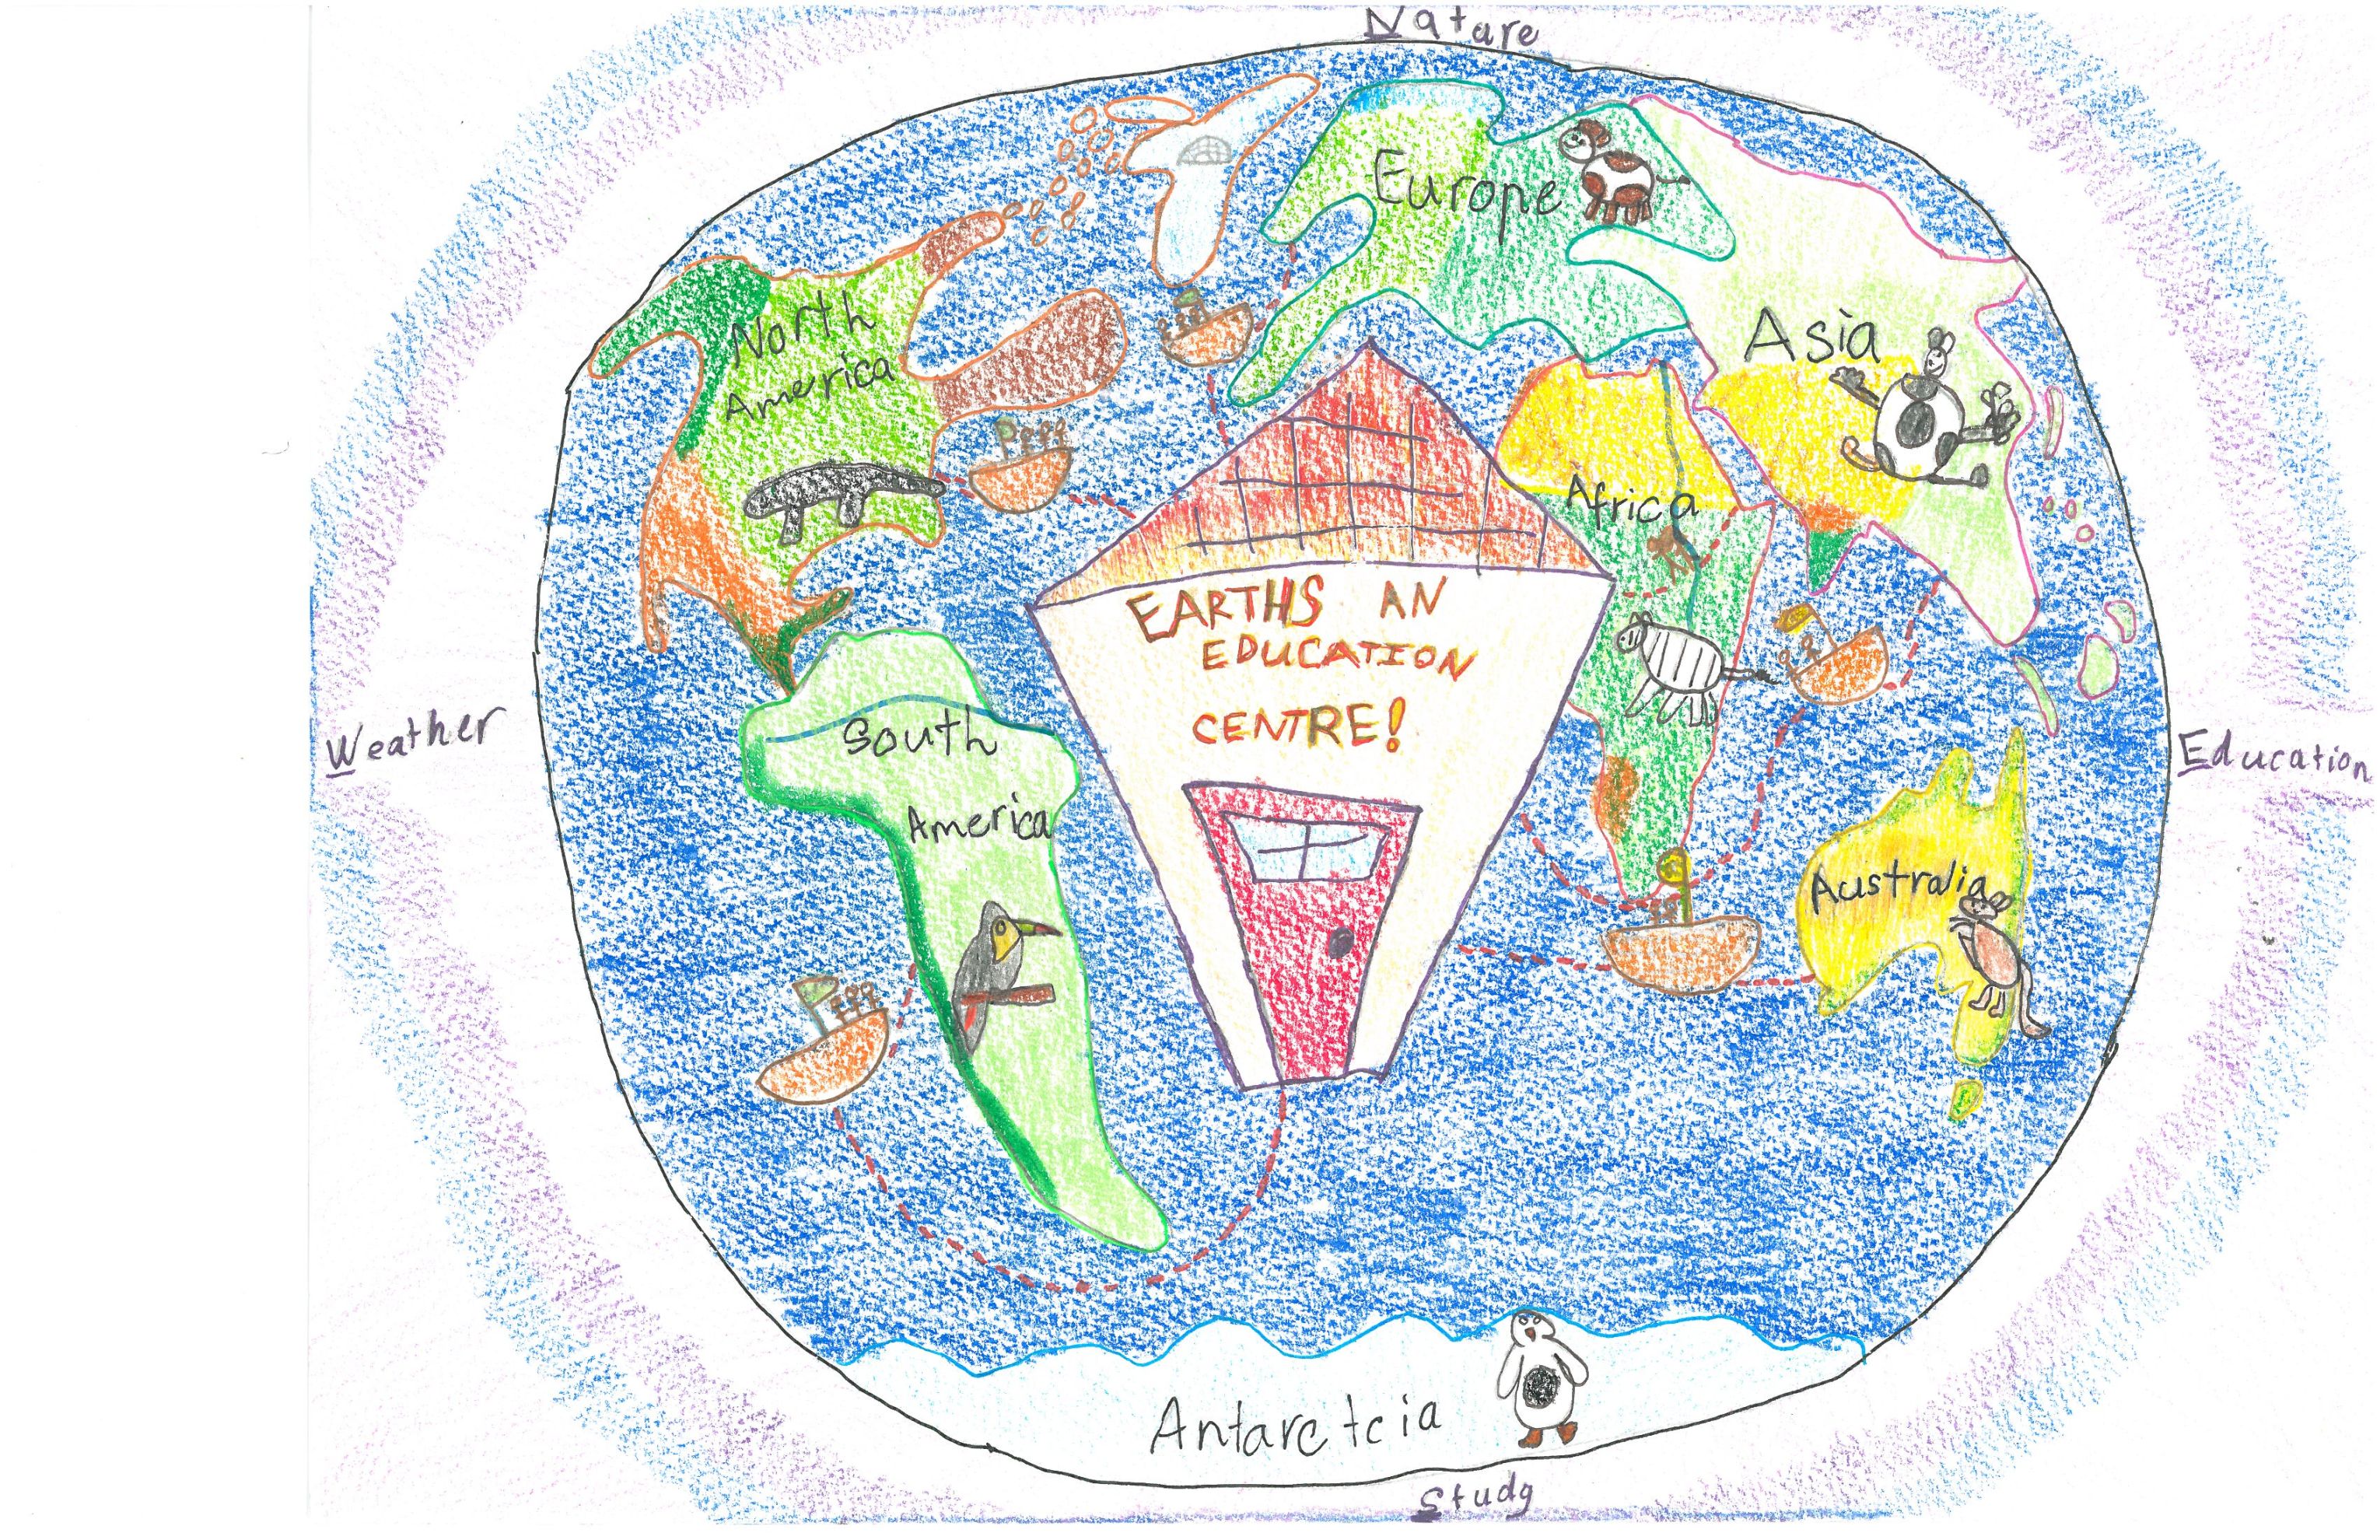 003 - Earth's an Education Centre
Amelia Muller - Age 8